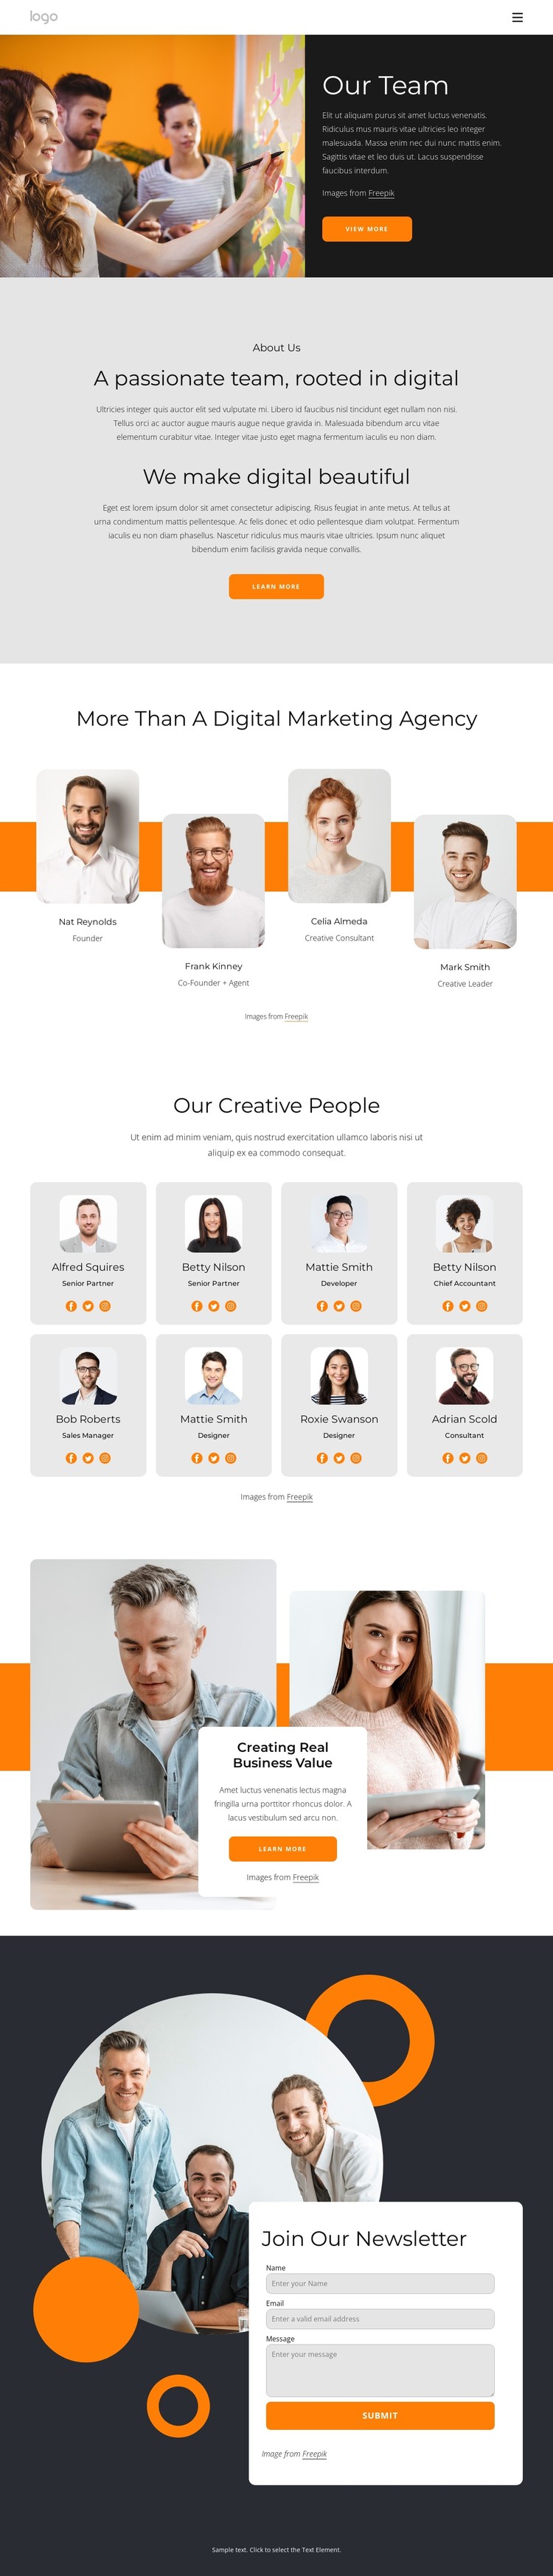 We are creative people with big dreams CSS Template